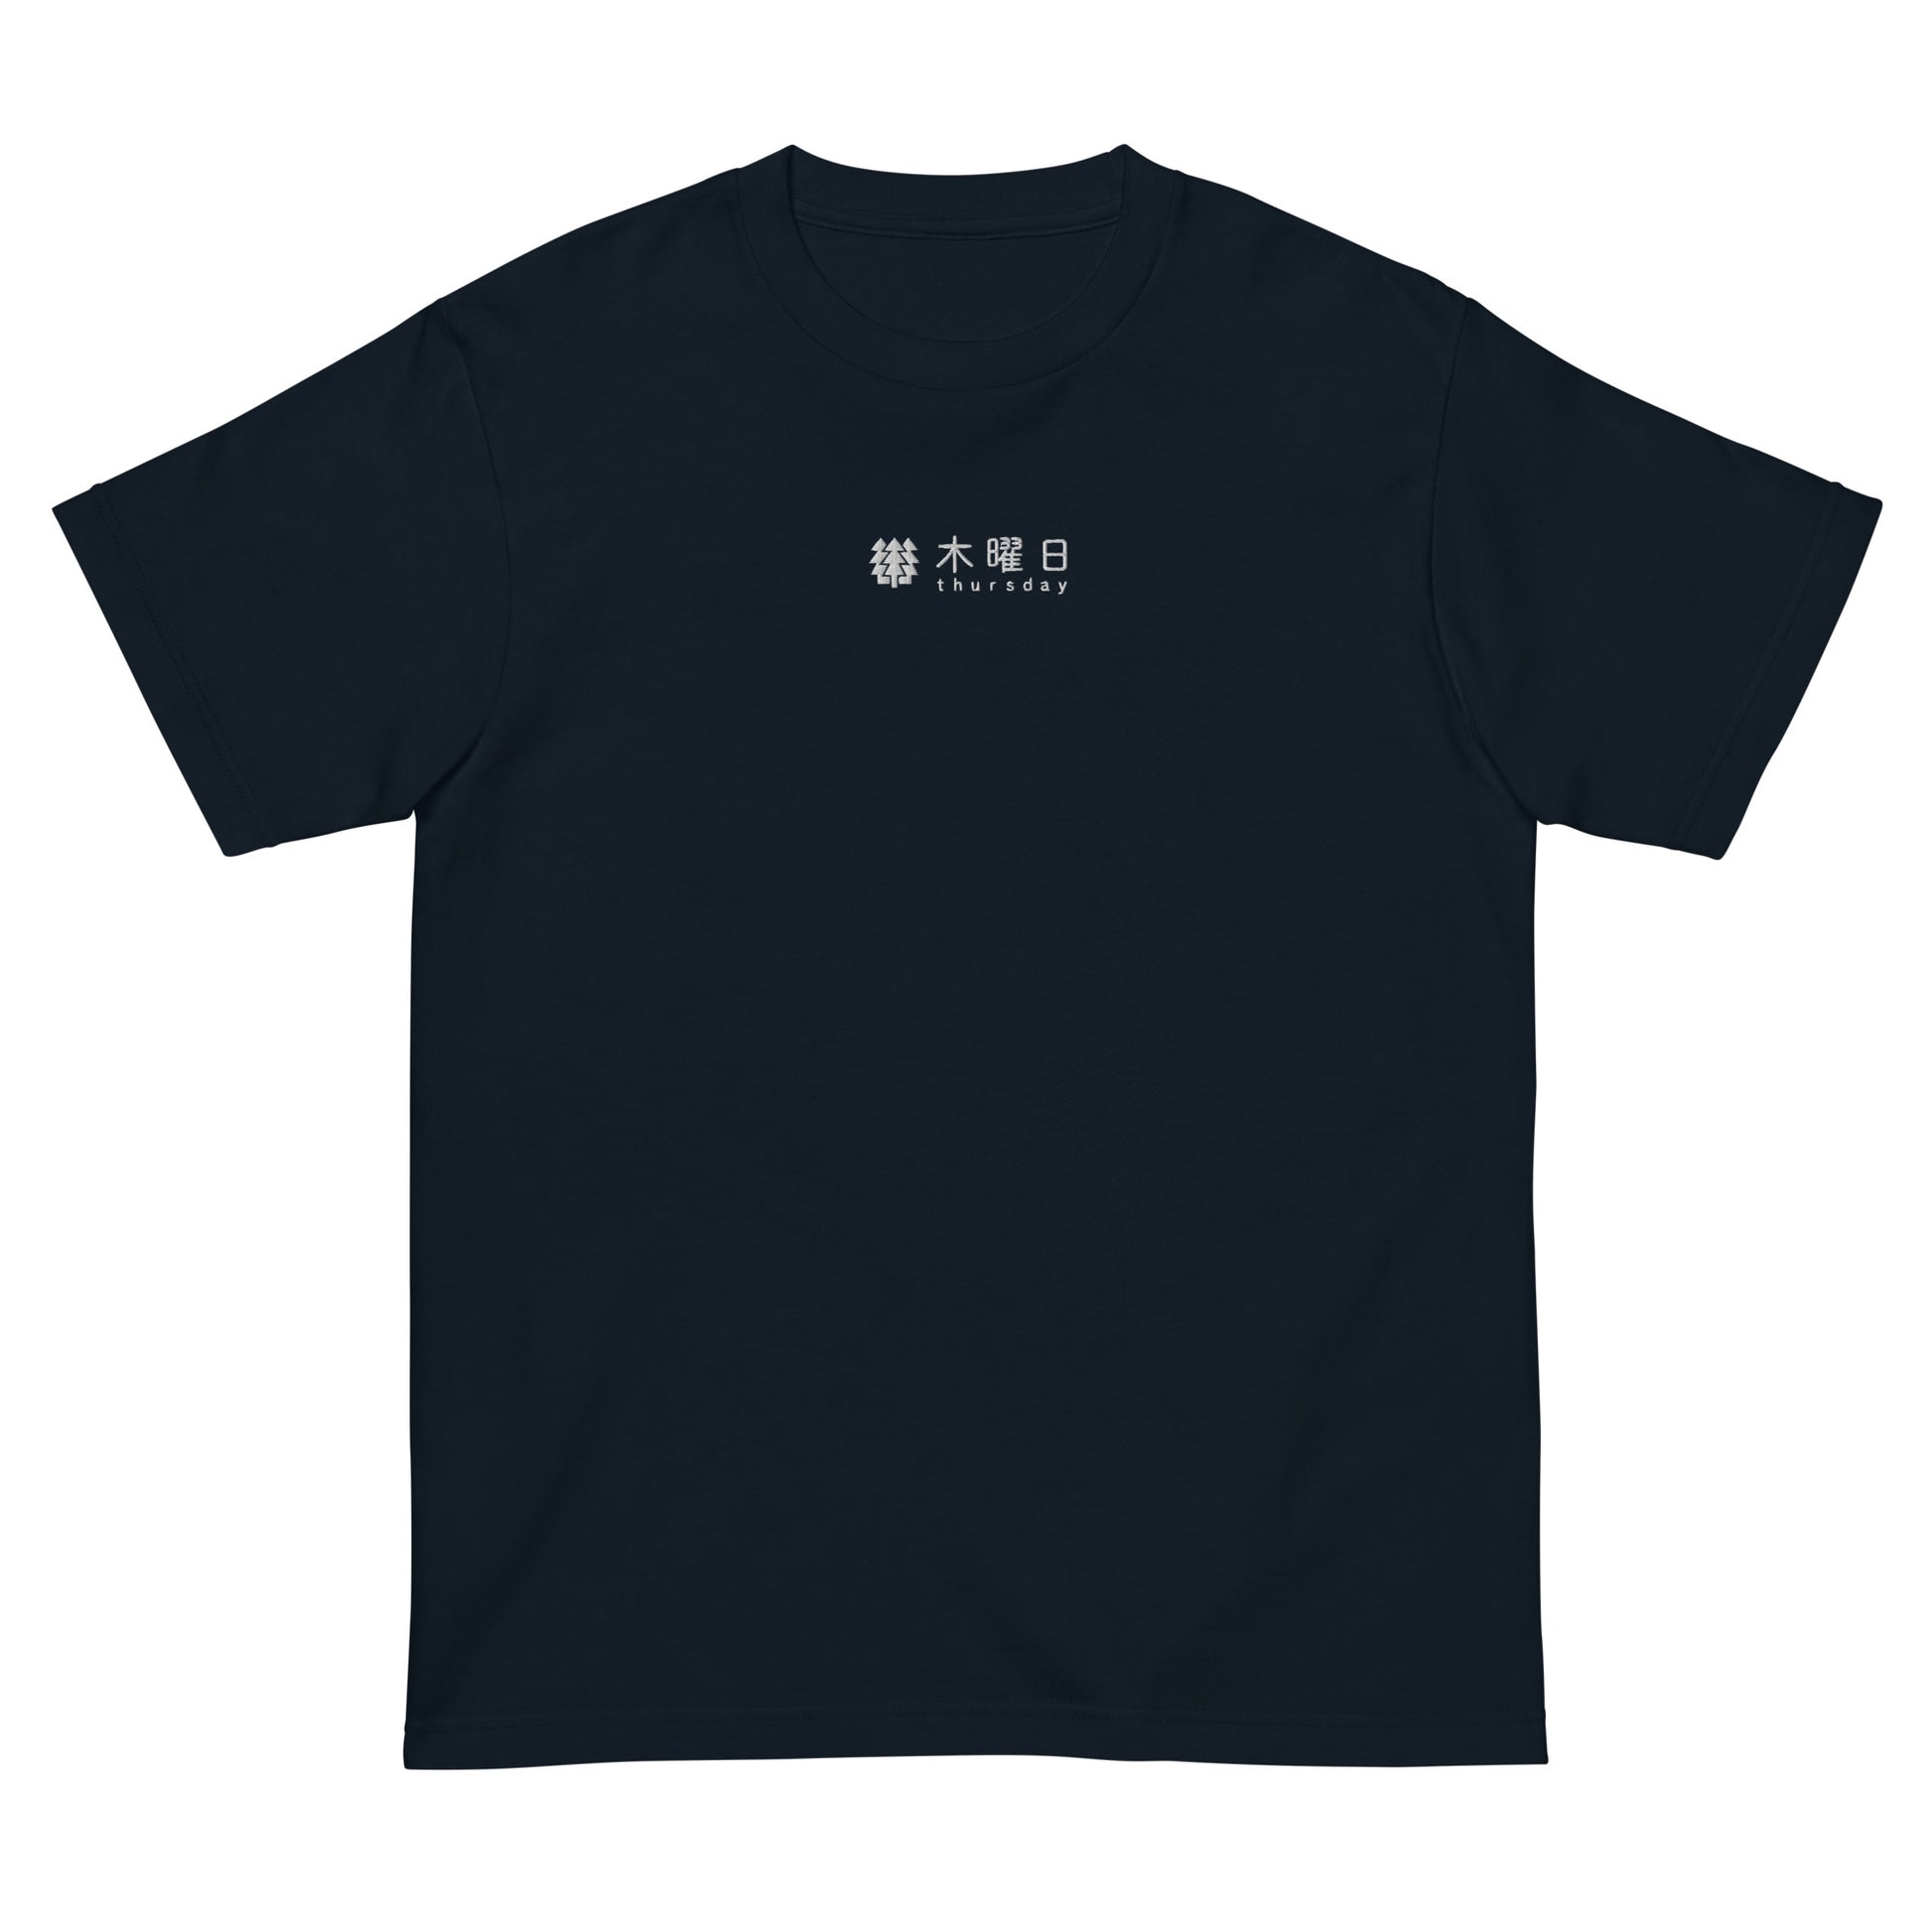 Navy High Quality Tee - Front Design with an White Embroidery "Thursday" in Japanese and English